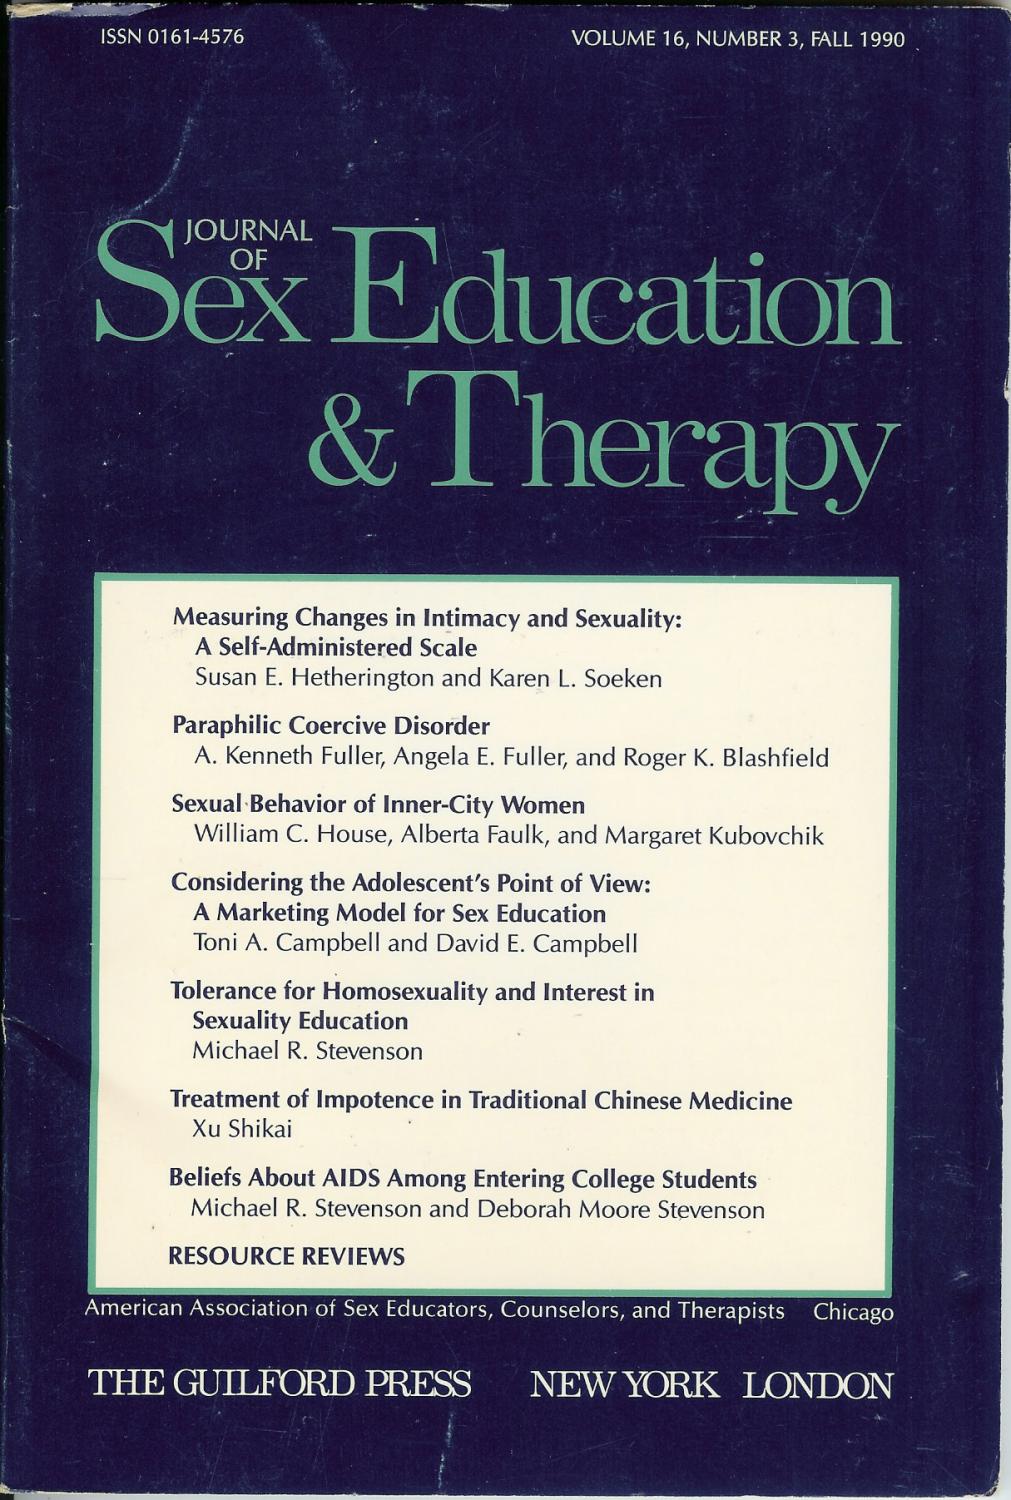 Journal Of Sex Education And Therapy Volume 16 Number 3 Fall 1990 By Editors Good Trade